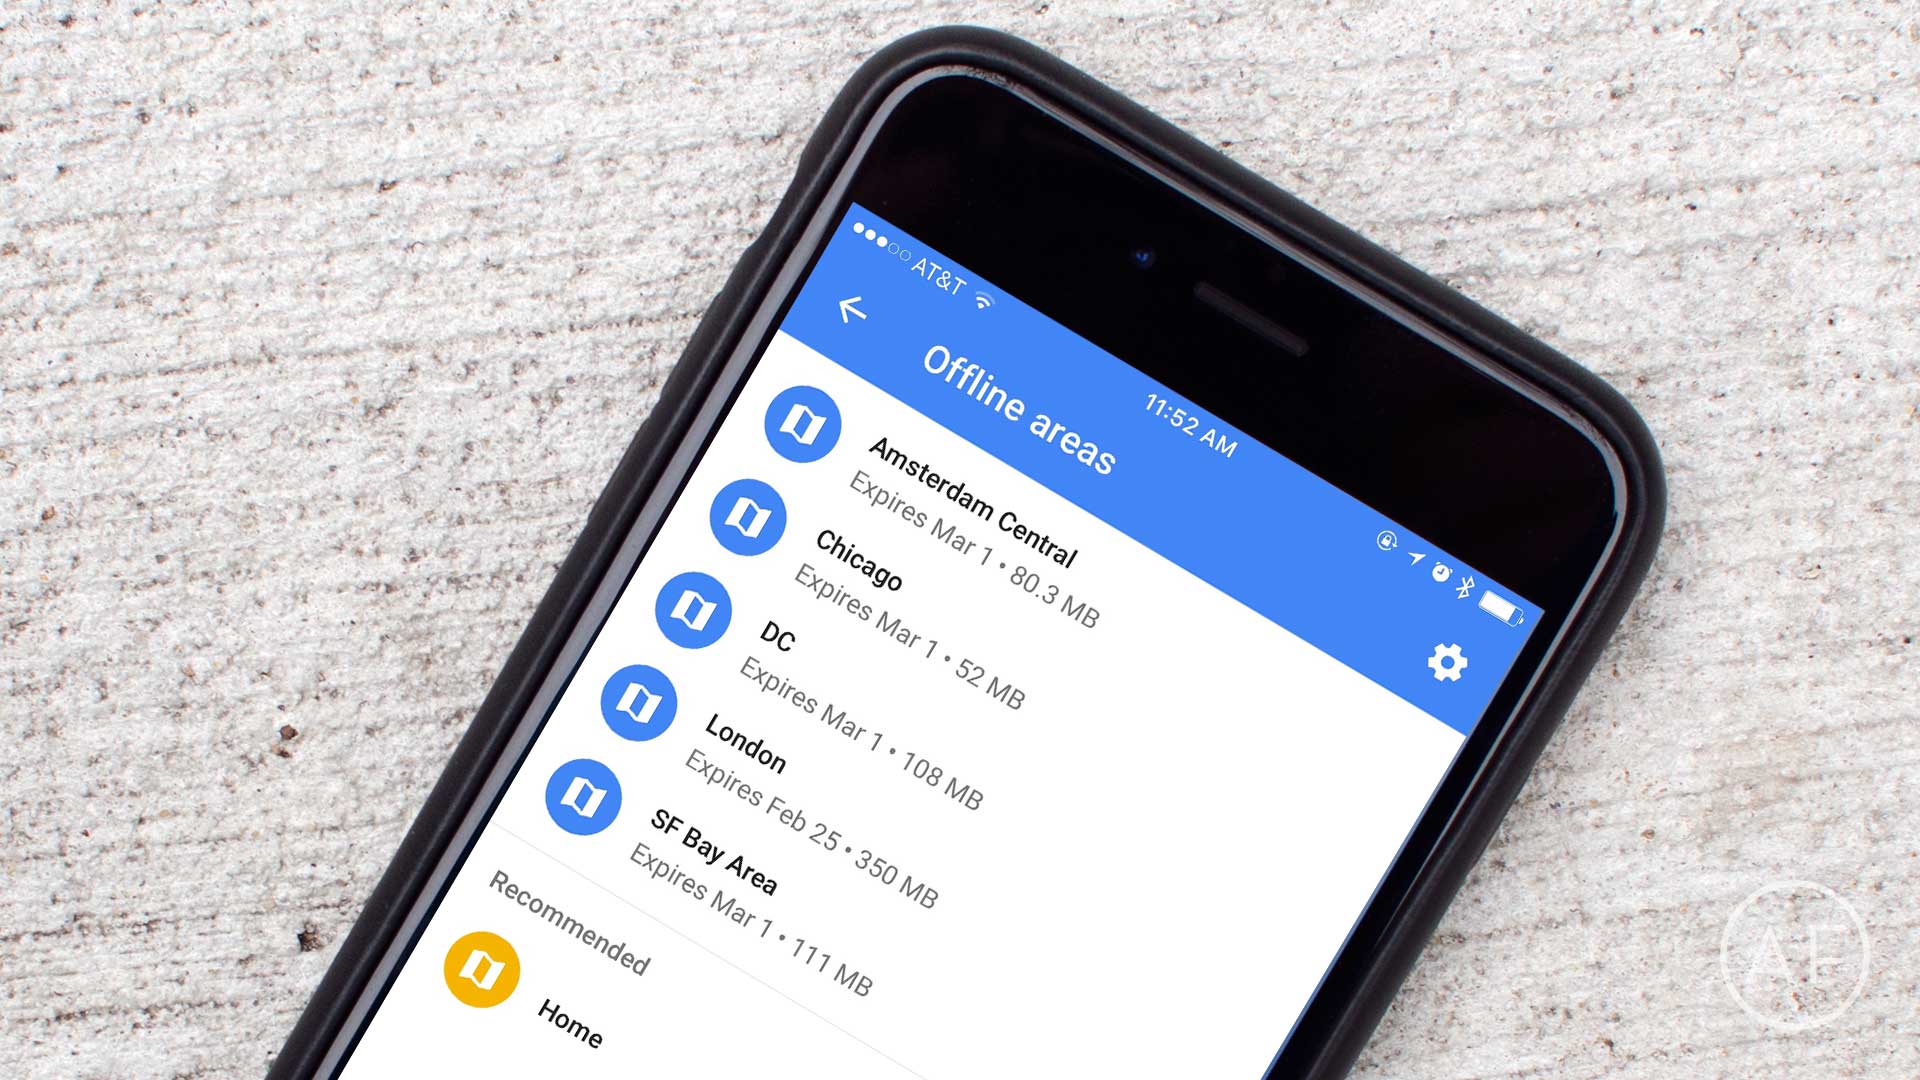 Need offline maps for times when they're no cellular or Wi-Fi data available? Google Maps gives them to you for free.